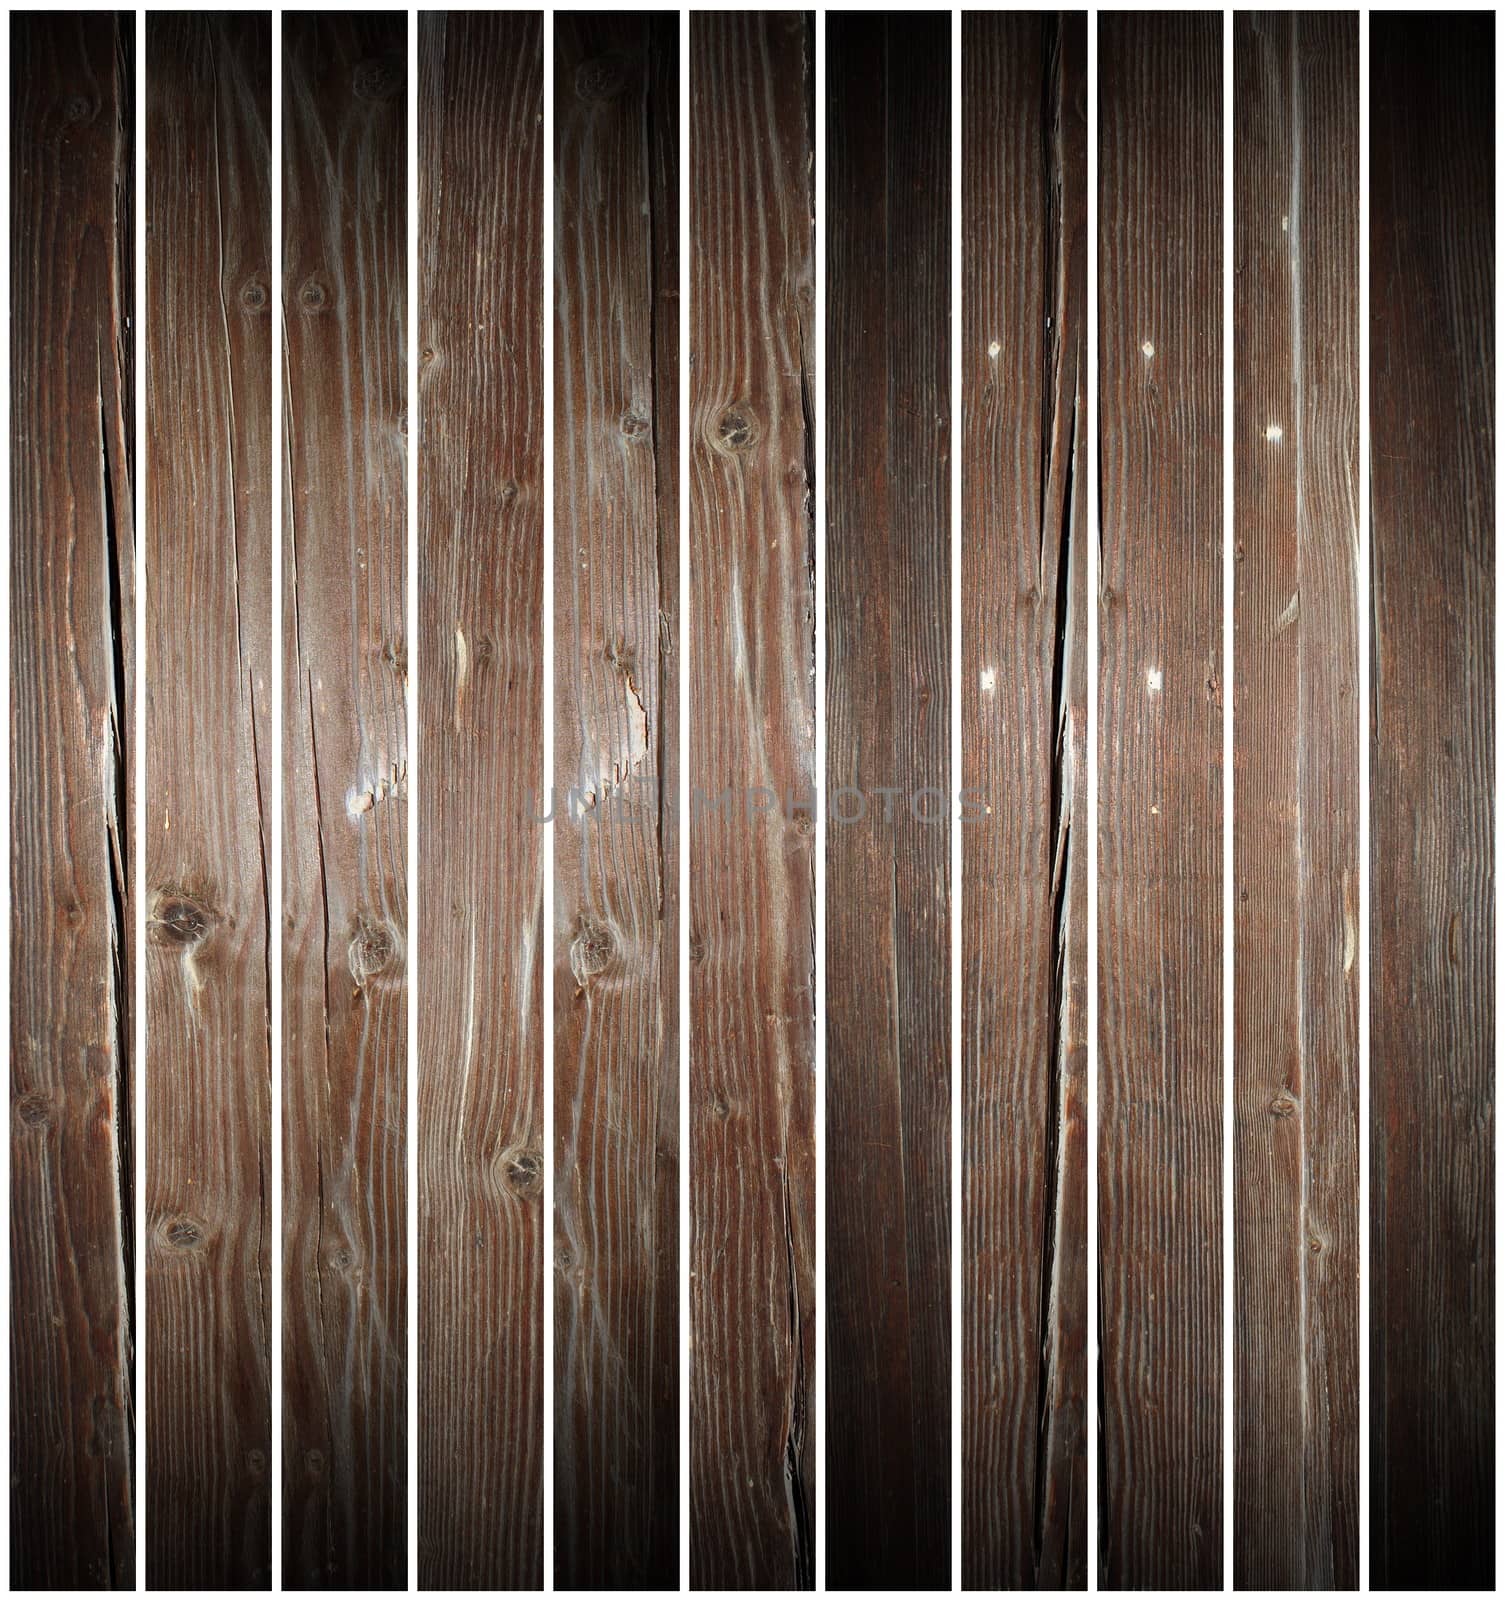 old wood planks for your design by taviphoto